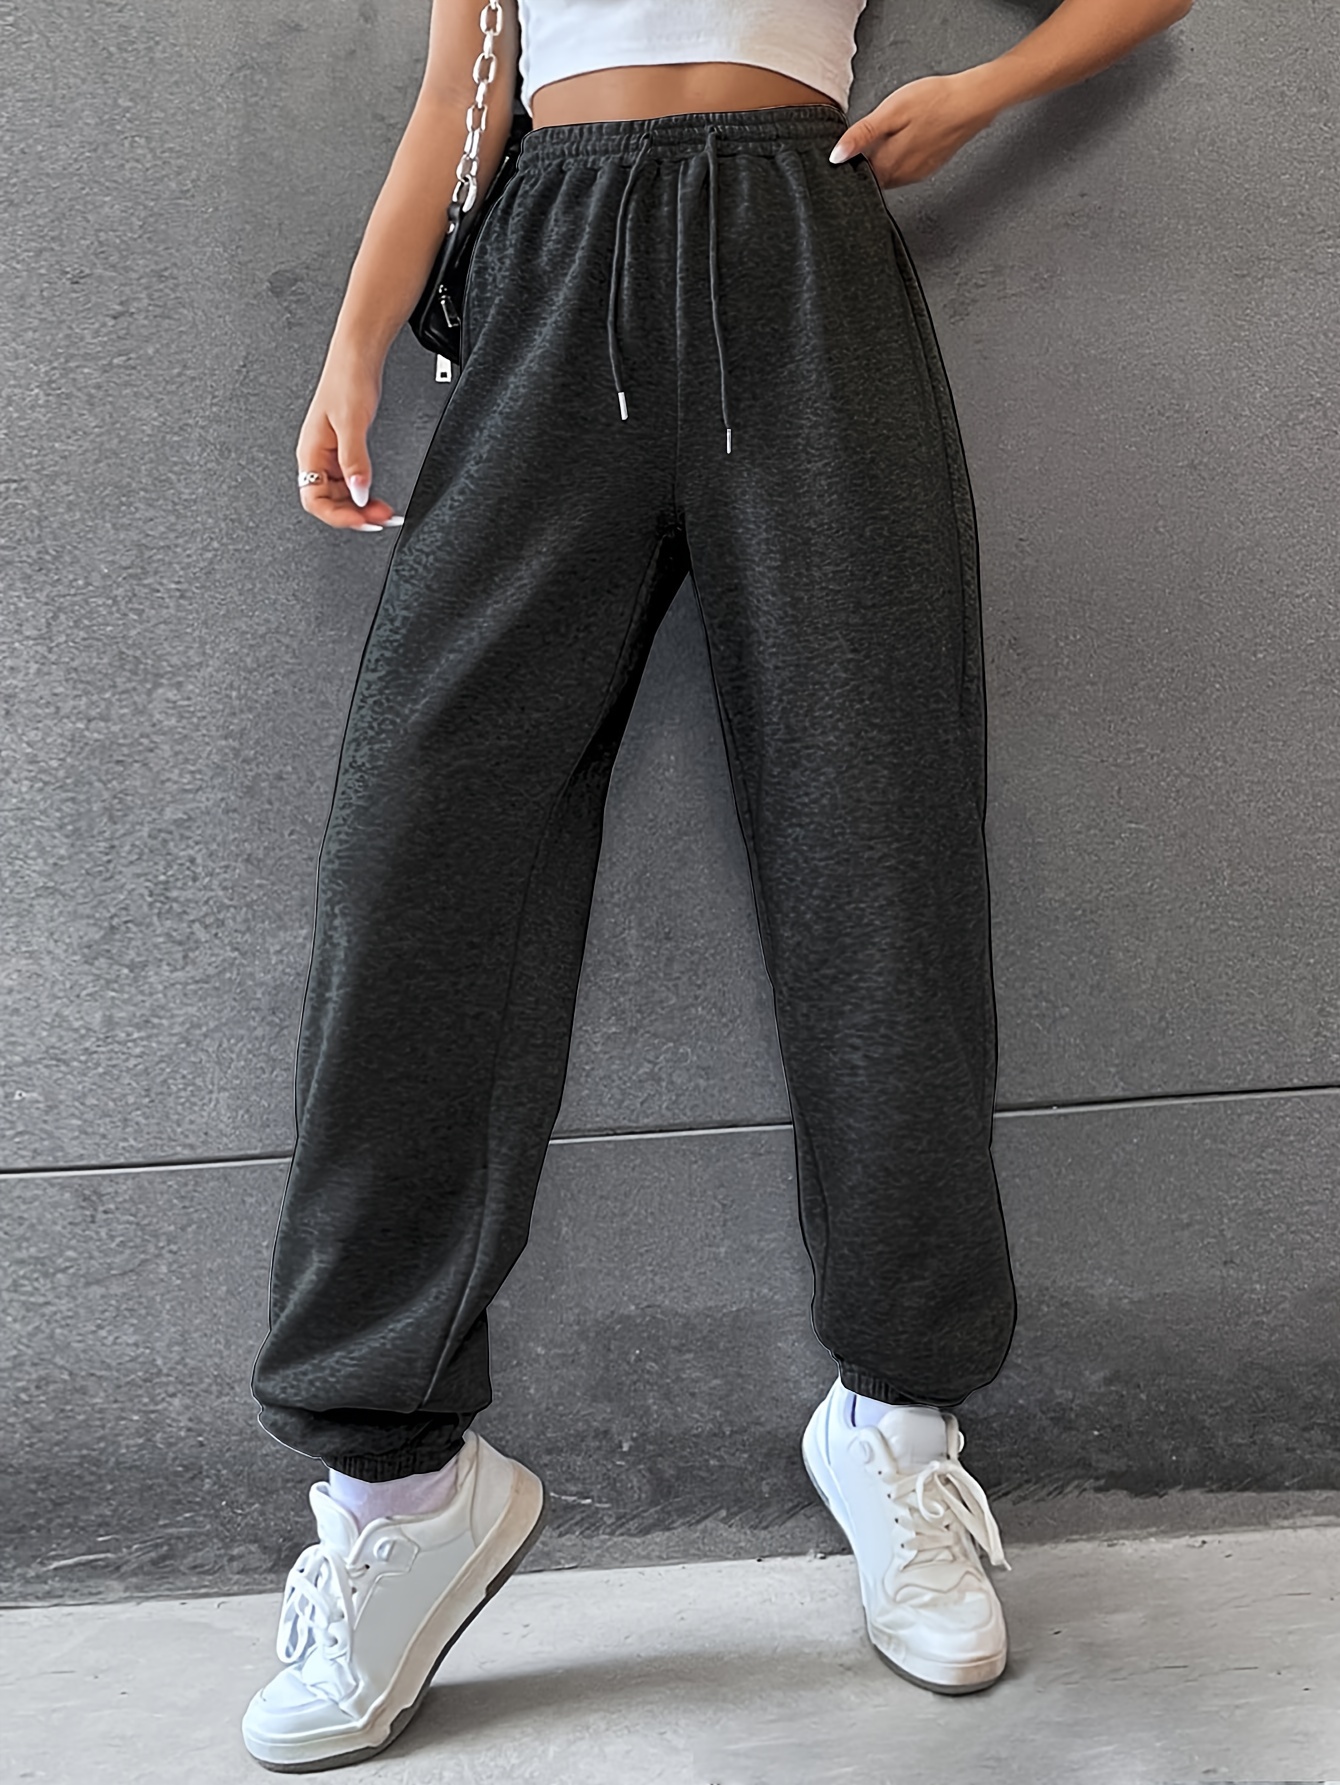 solid color casual sports pants drawstring elastic waist running jogging sweatpants womens athleisure